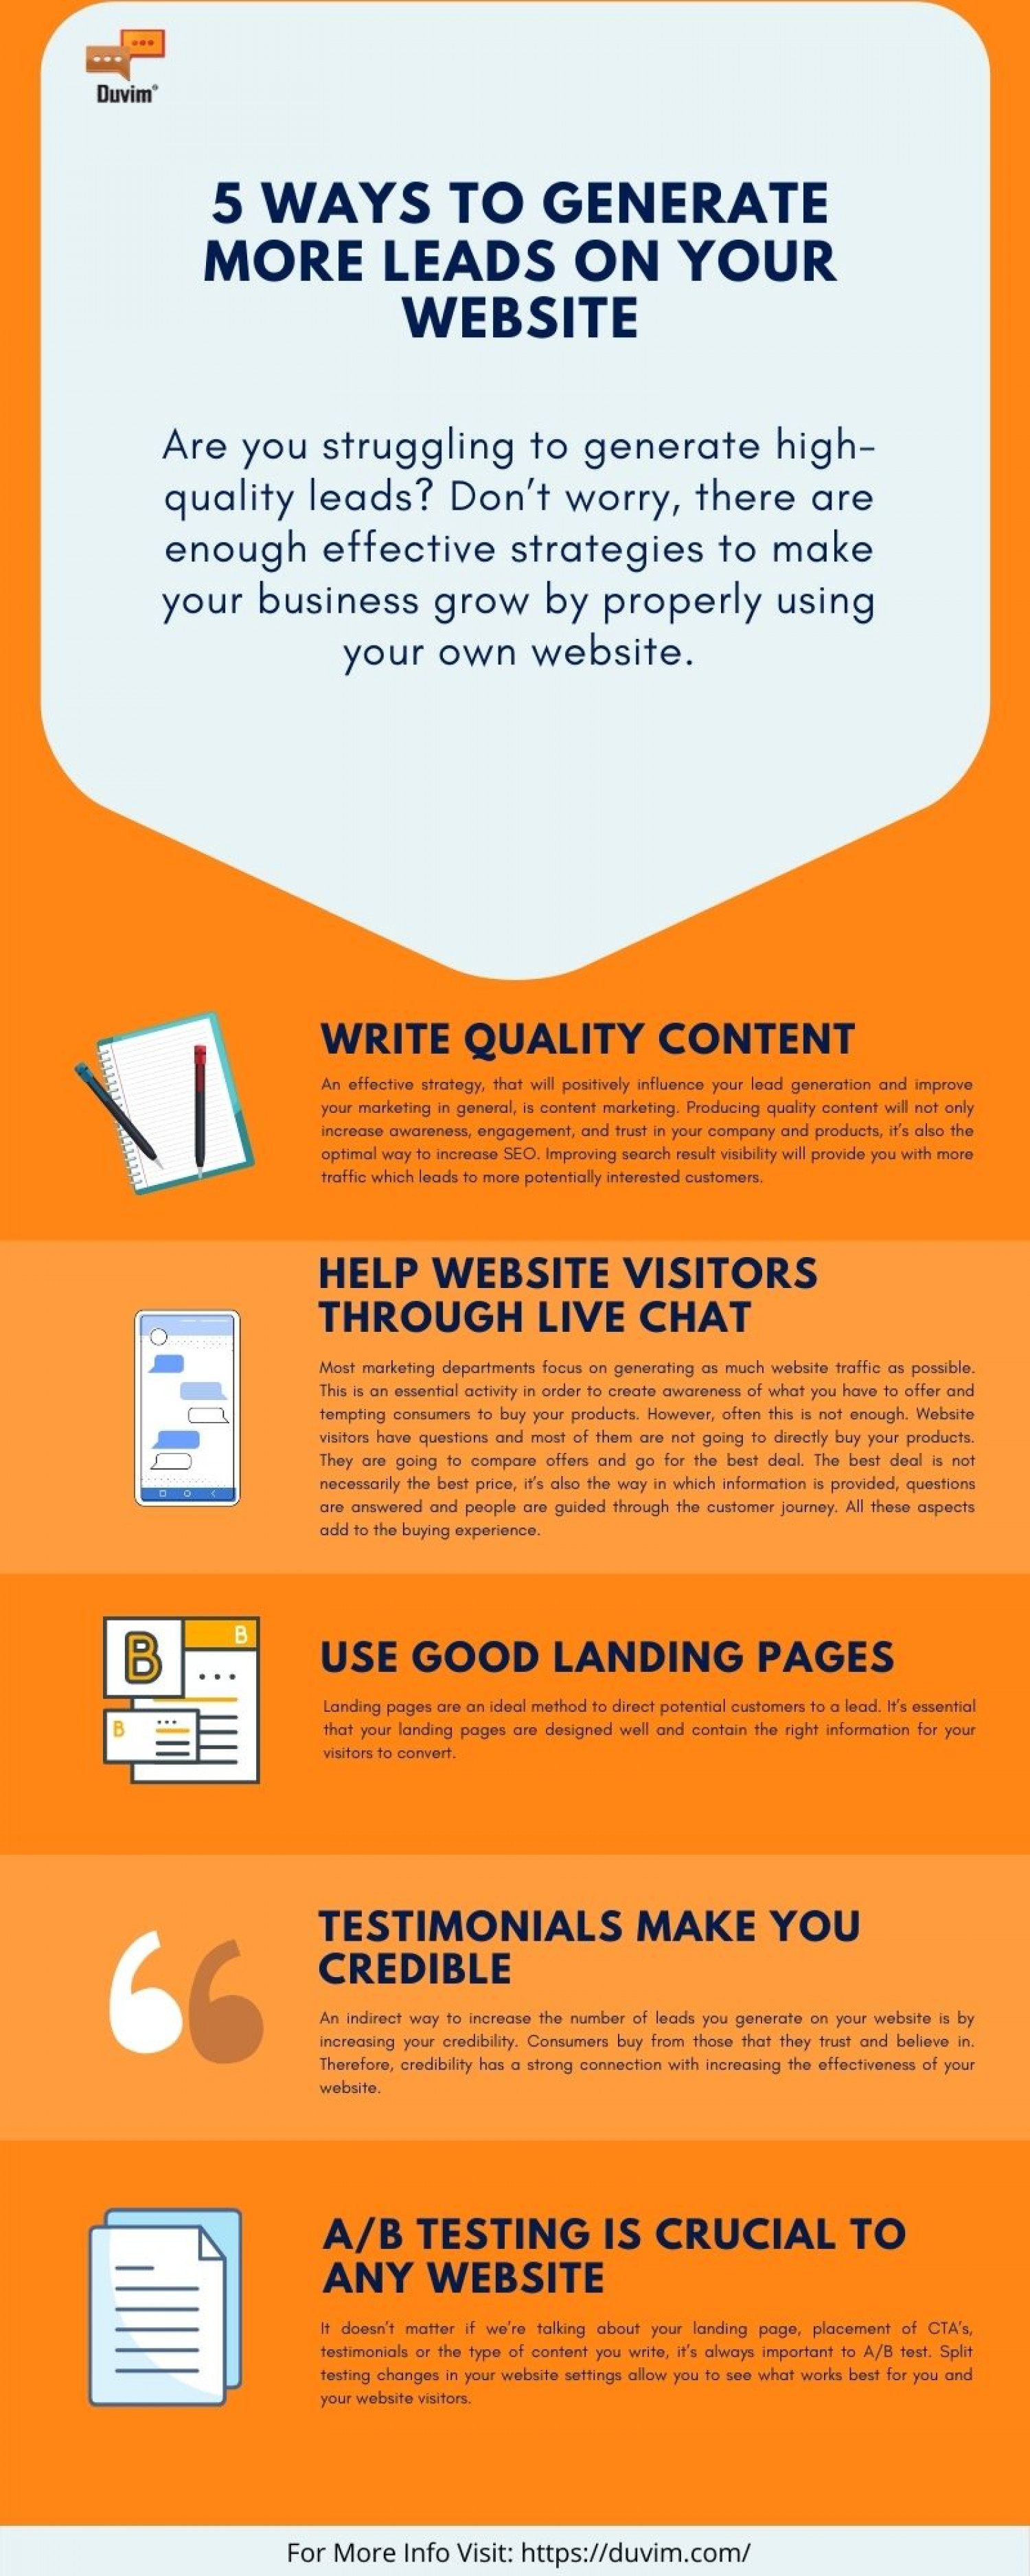 5 Ways To Generate More Leads On Your Website Infographic